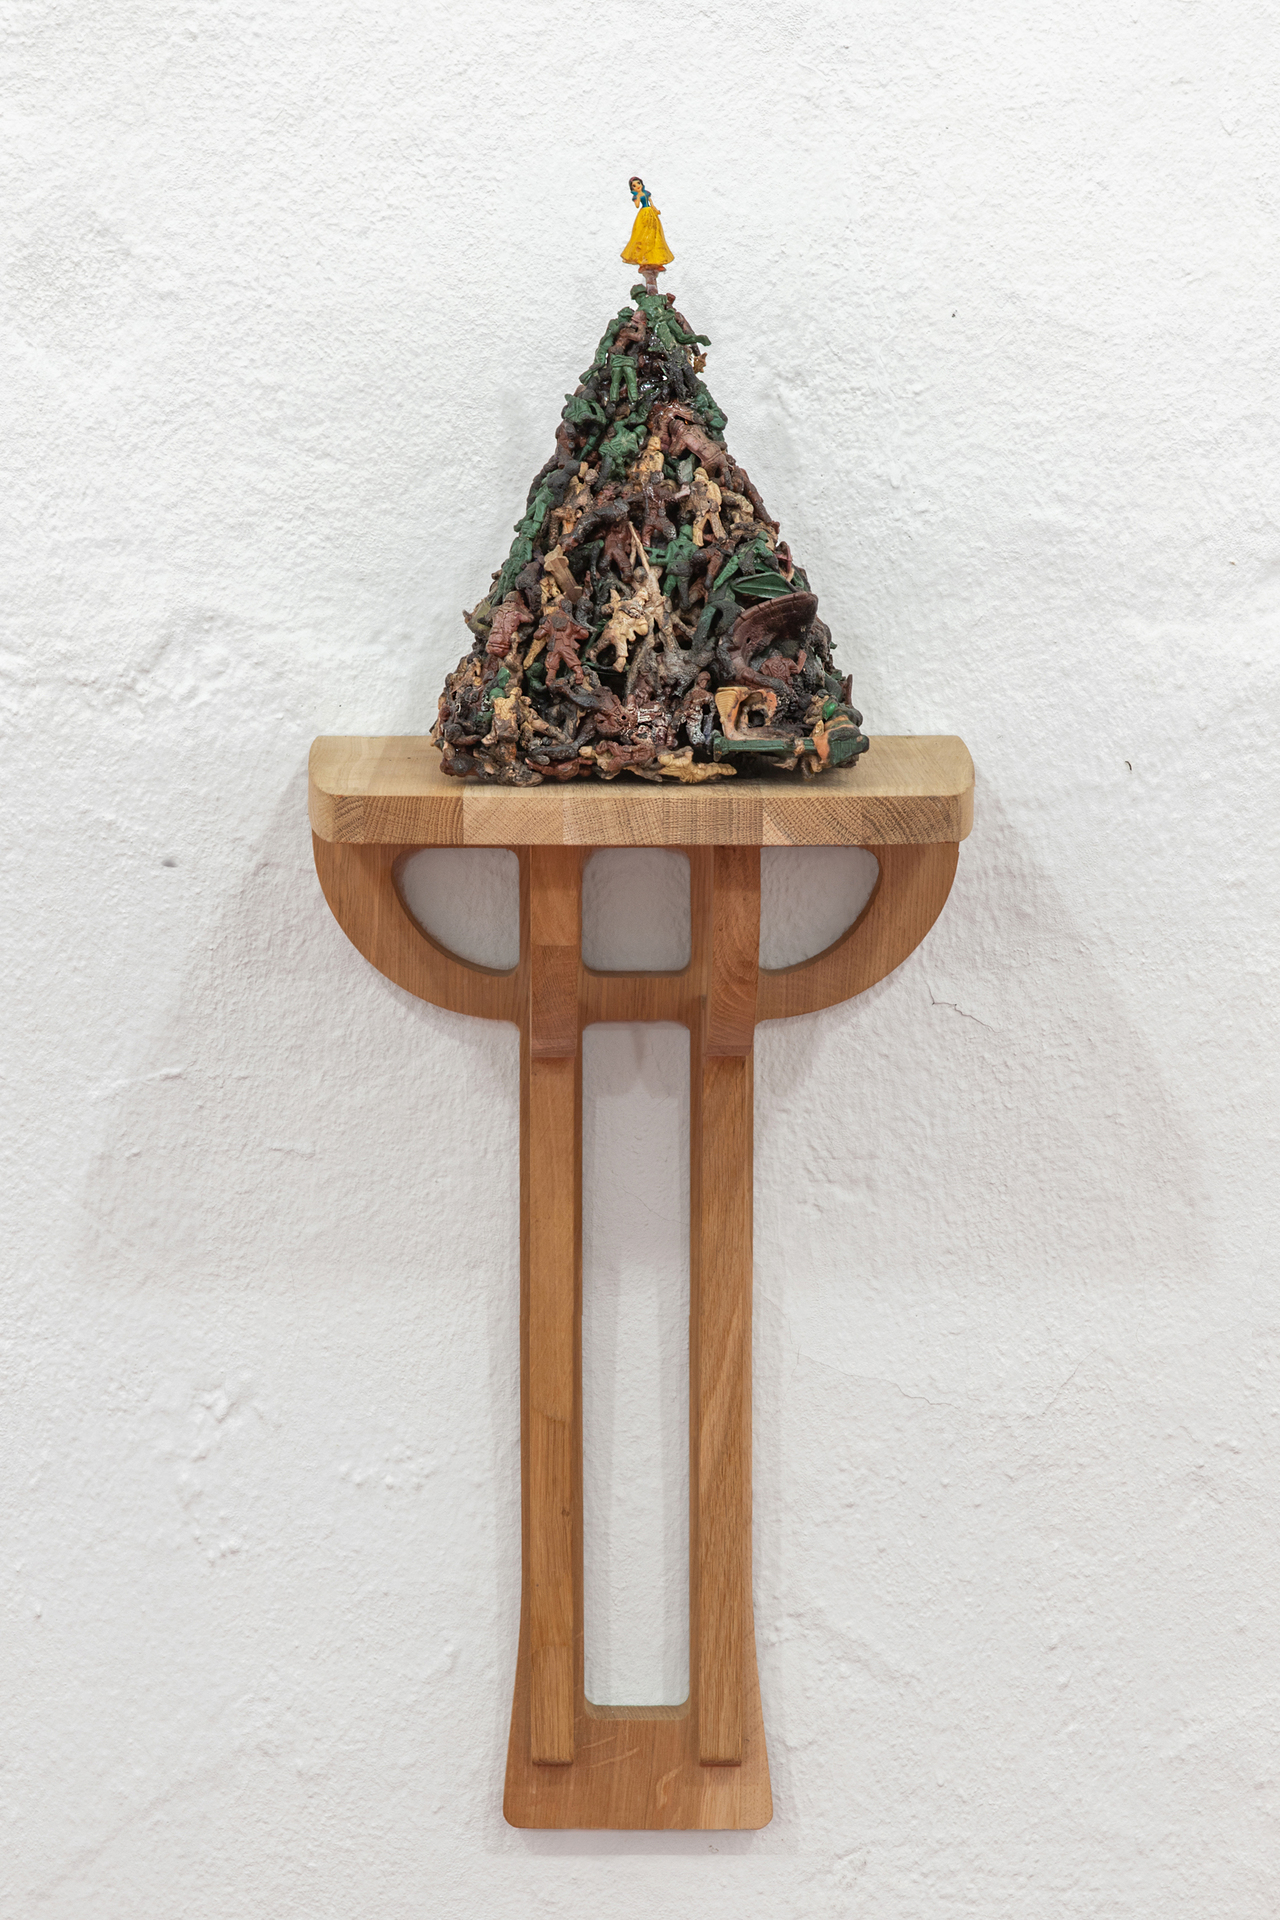 Five Types of Soldiers, 2011, plastic figurines treated with cyanoacrylate and nitrogen enriched gasoline, 17 × 27 × 20 cm on top of handcrafted oak shelf, courtesy of the gallery